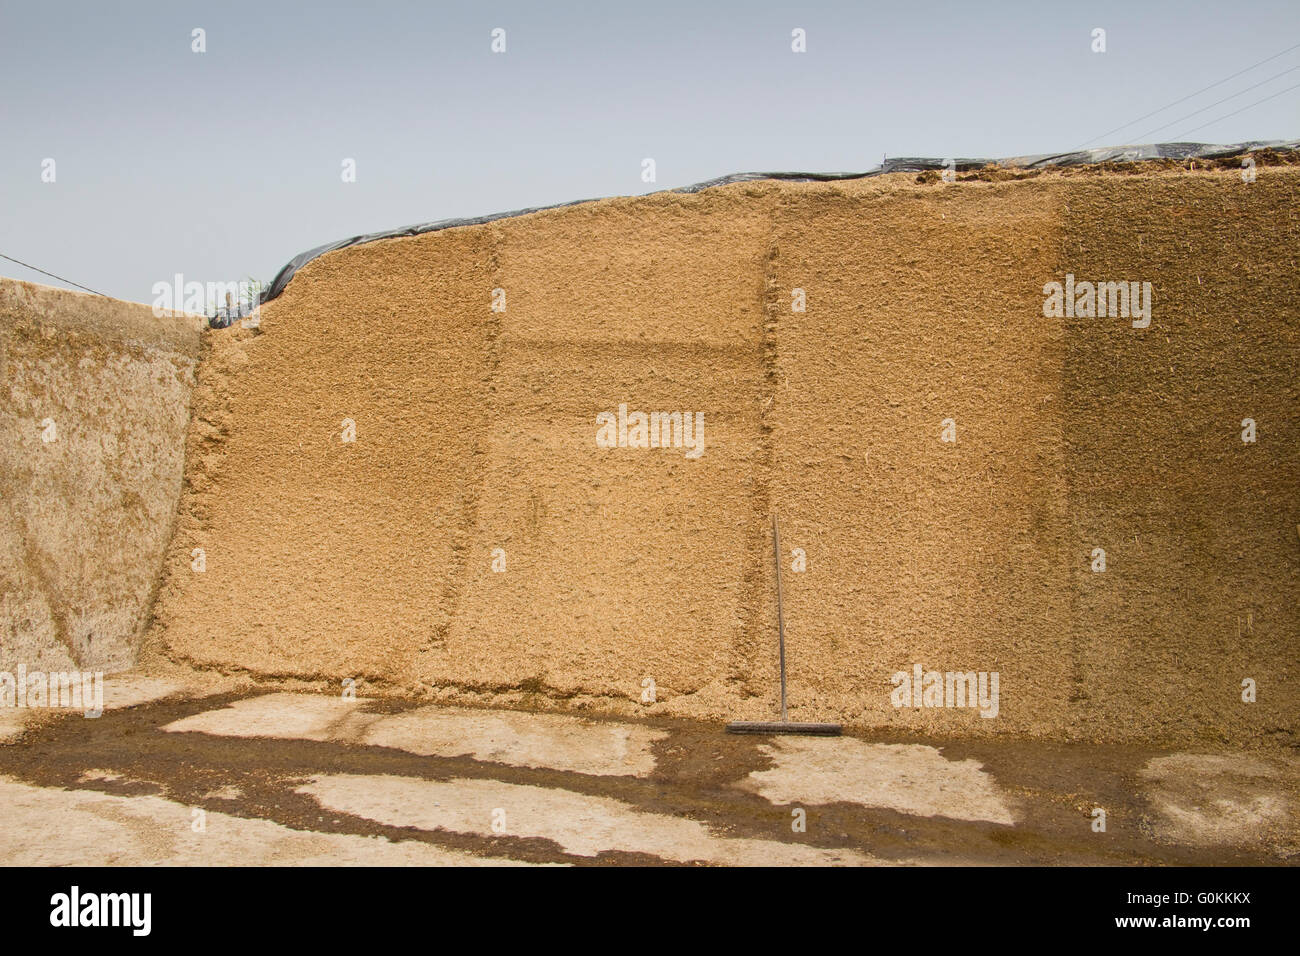 Maize silage in a bunker, Italy. Stock Photo